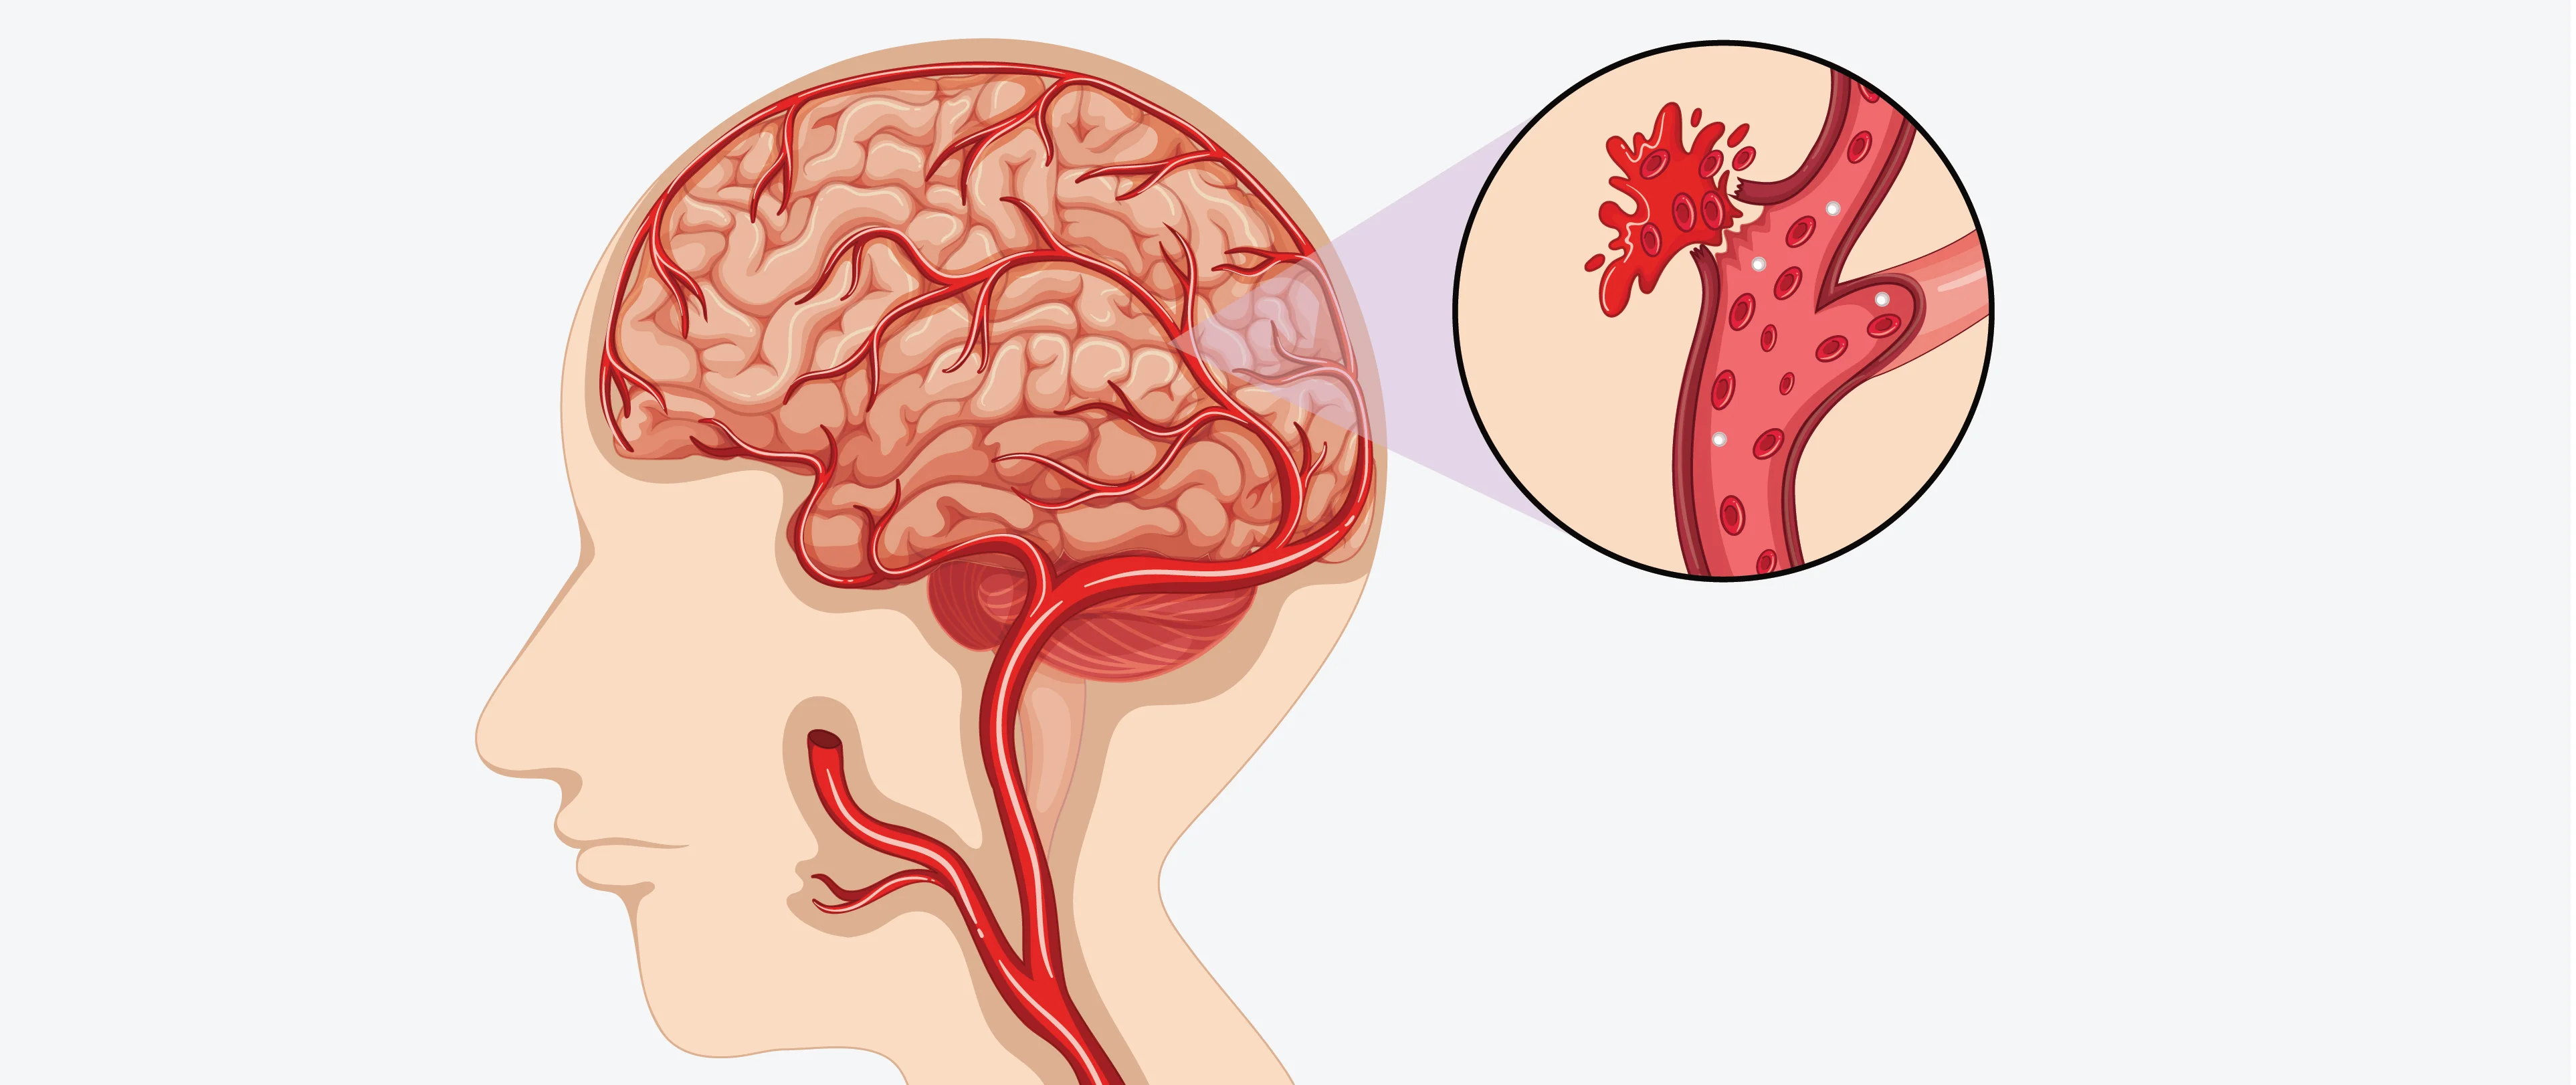 Hemorrhagic Stroke: What You Need to Know